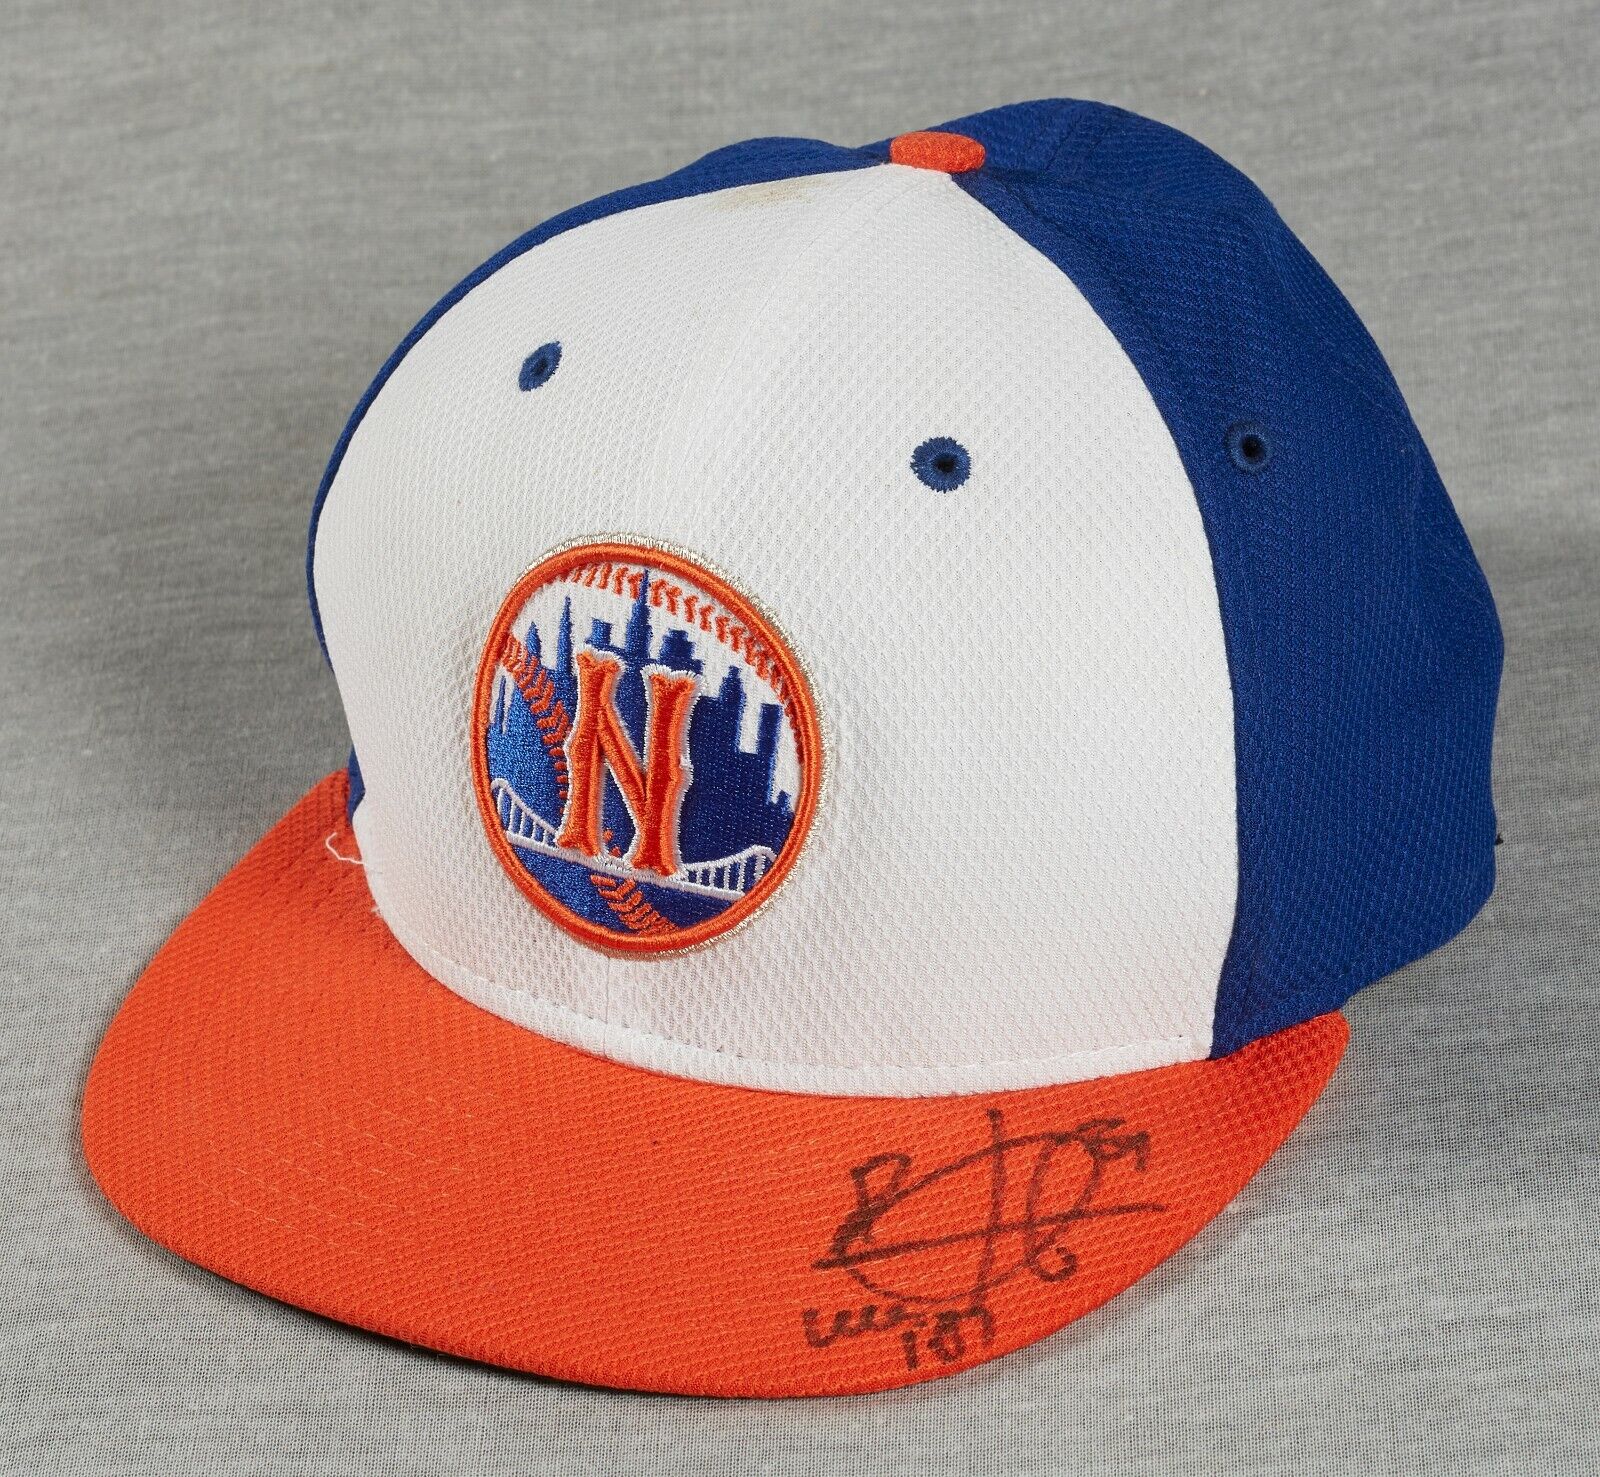 Bryce Harper Signed 2013 Citi Field All Star Get Mets Hat With Jsa Coa